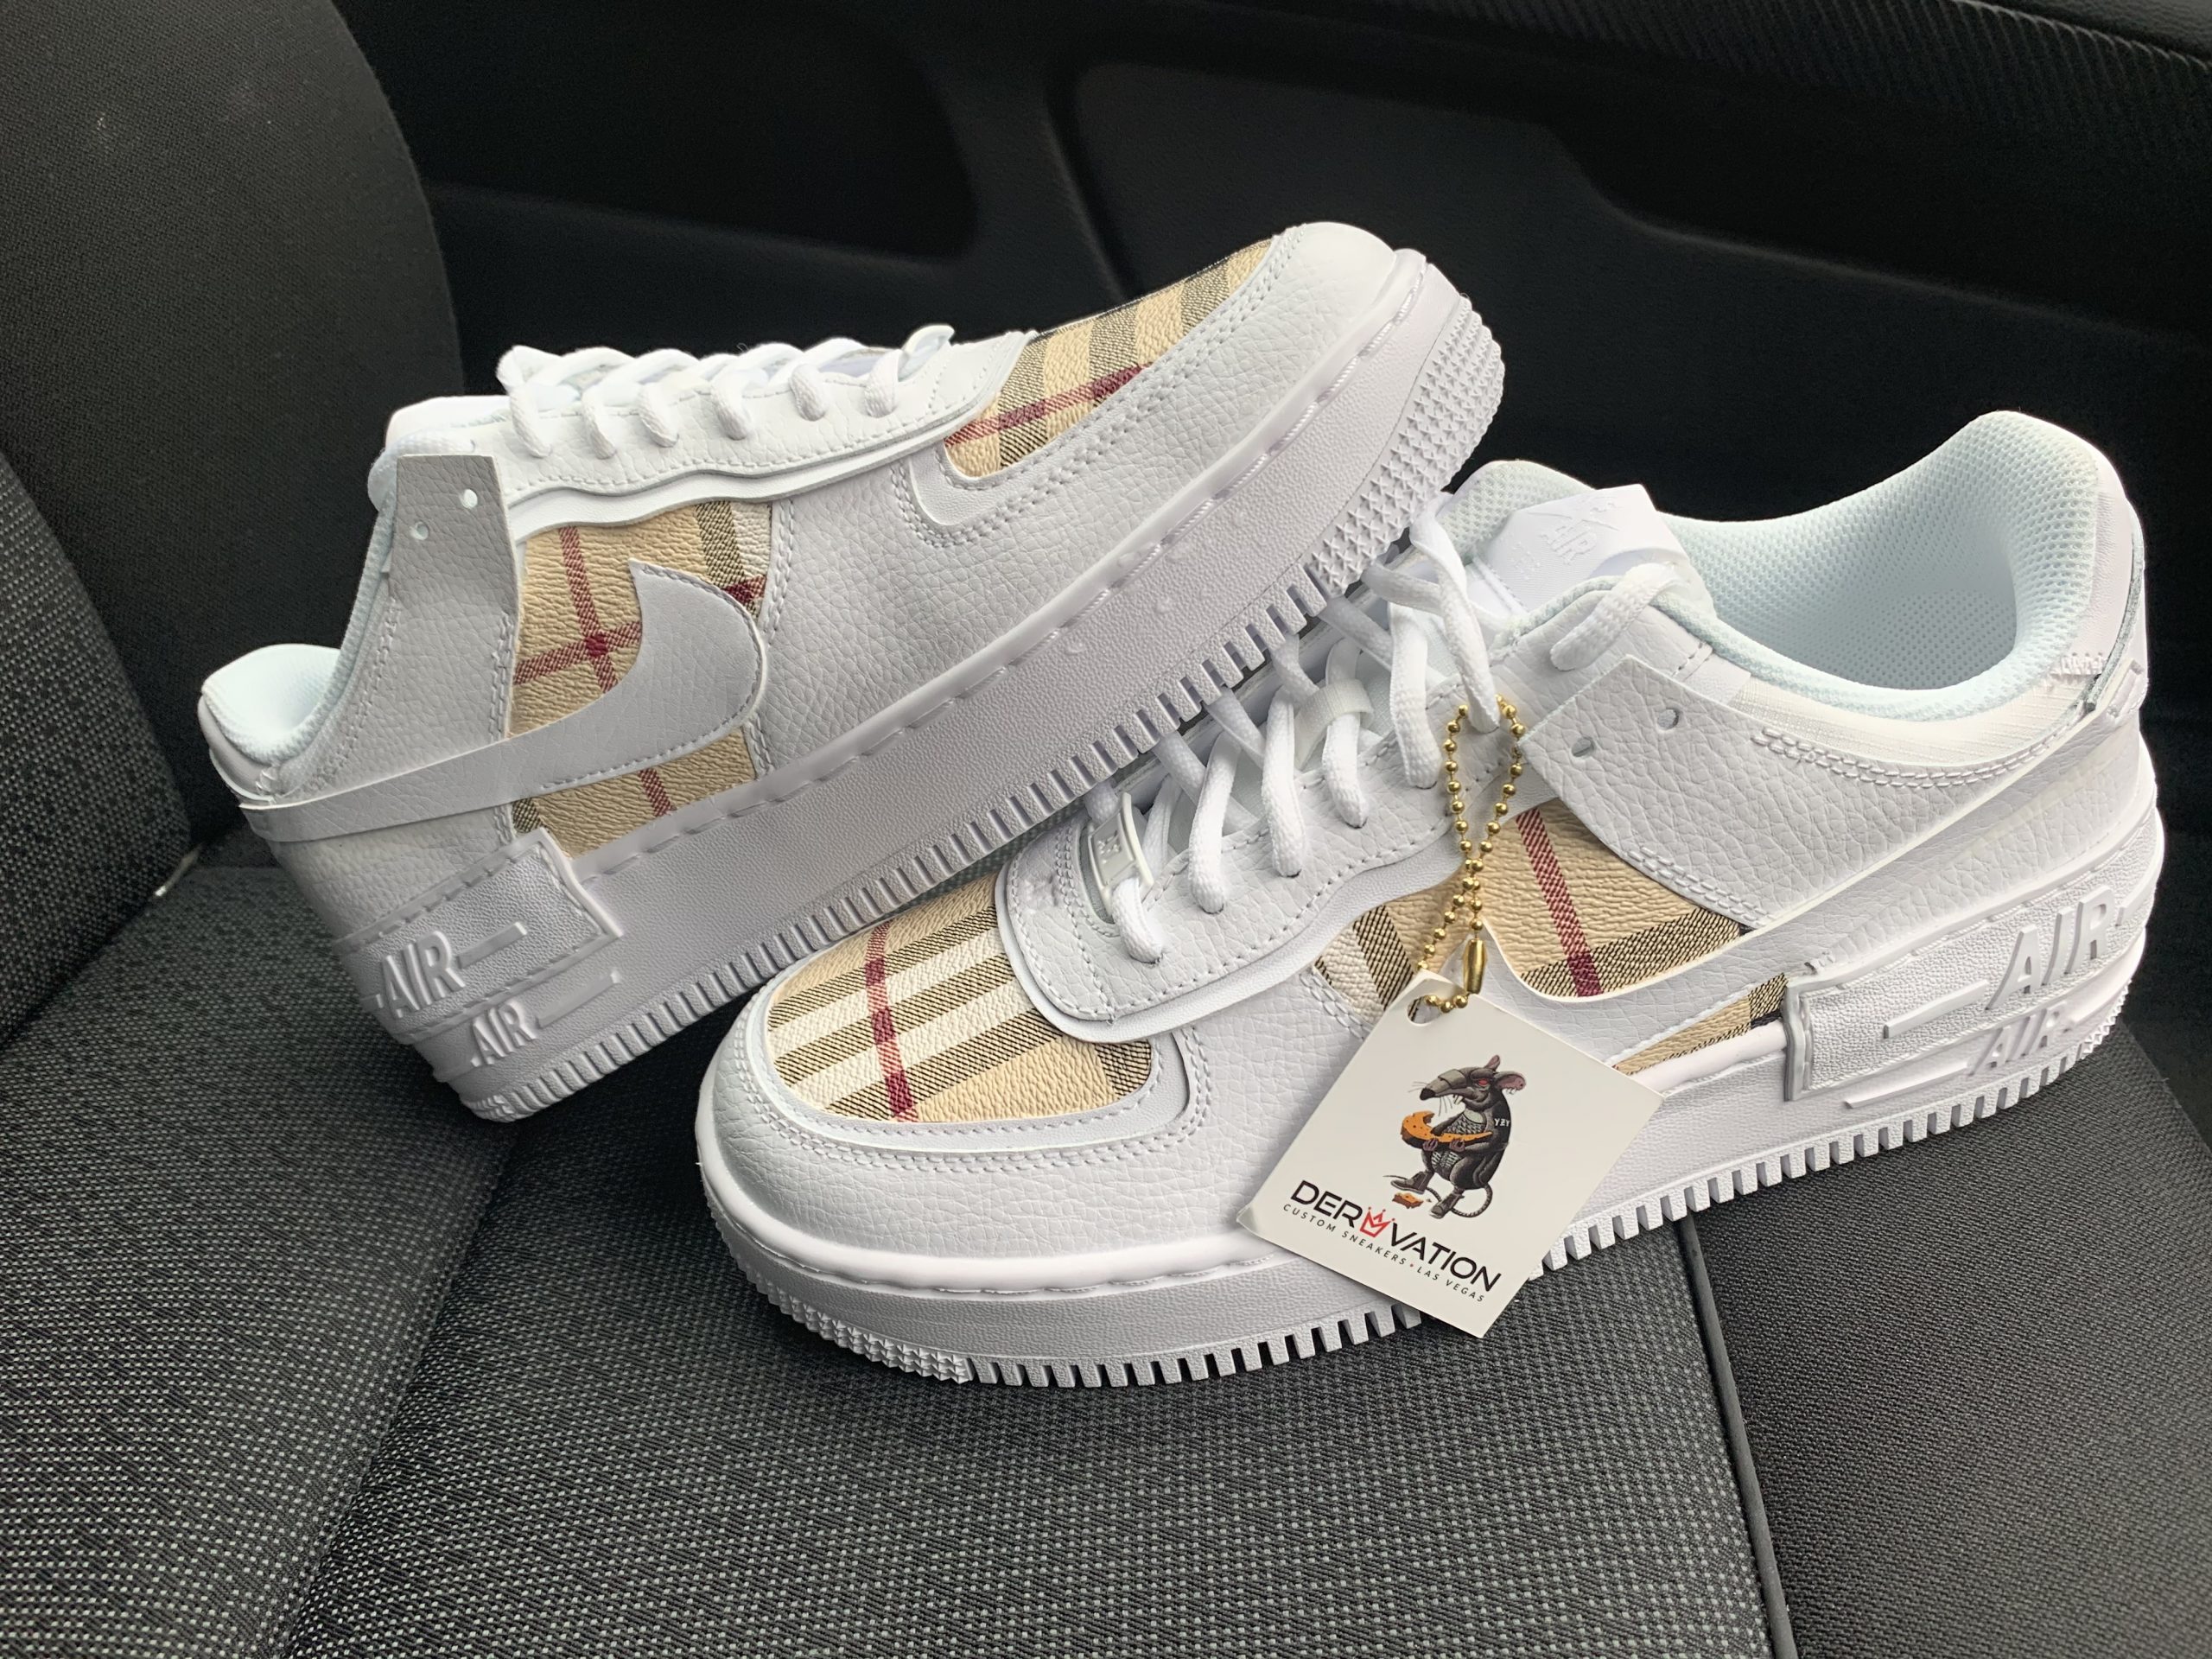 burberry air force 1 price